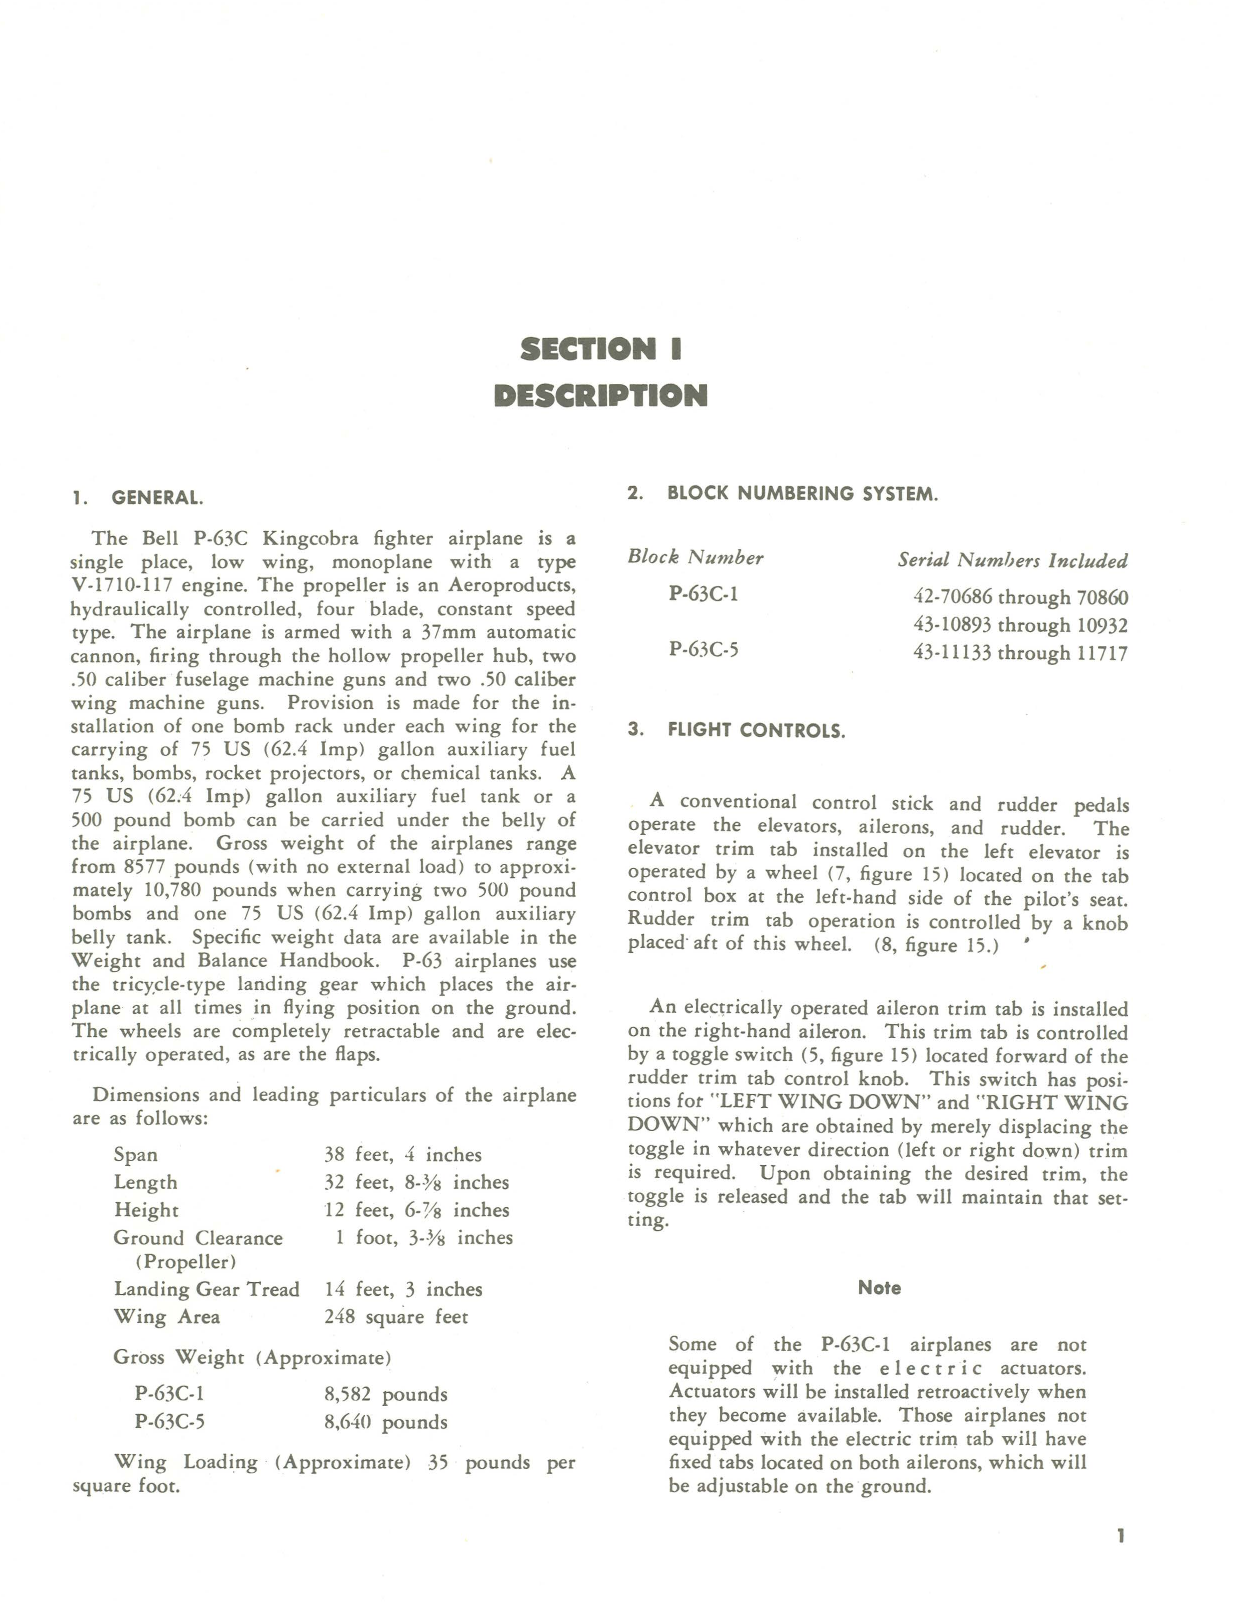 Sample page 5 from AirCorps Library document: Pilot's Flight Operating Instructions for P-63C